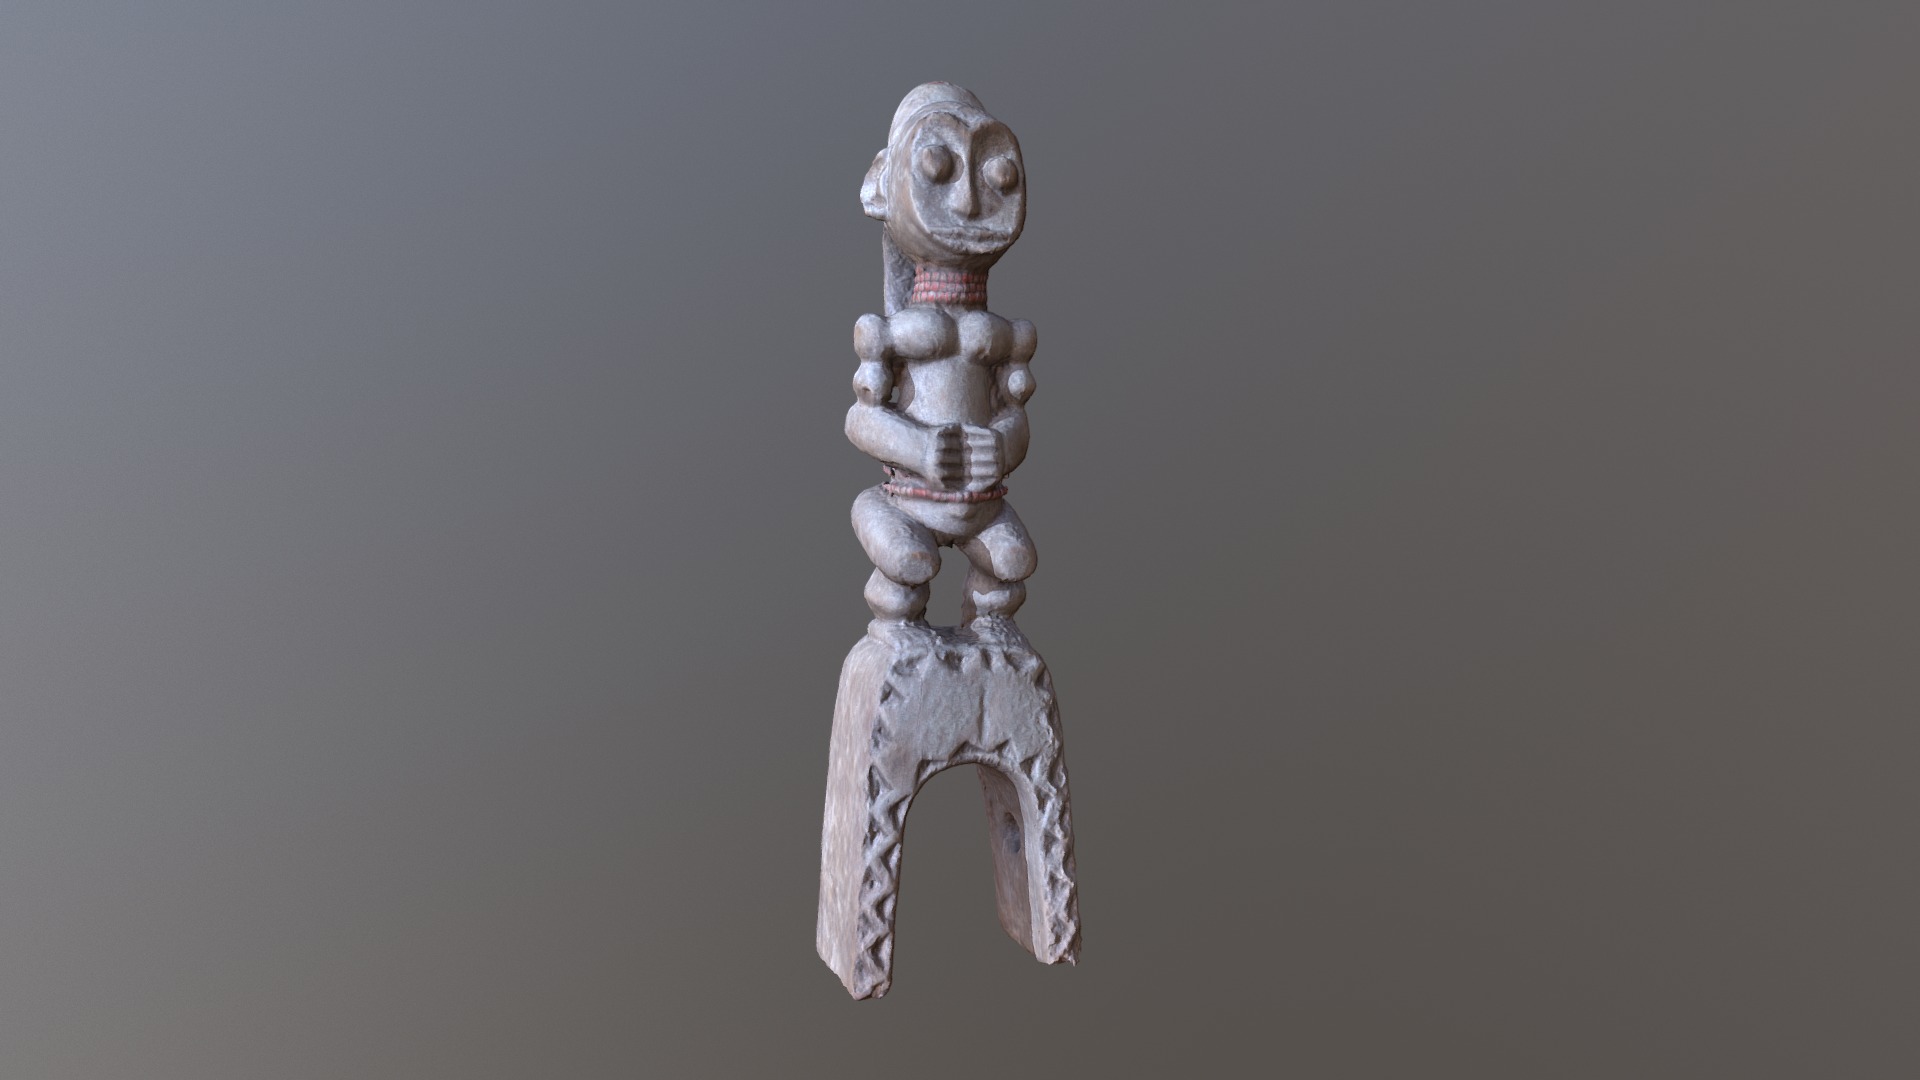 3D model Zimbabwean statue - This is a 3D model of the Zimbabwean statue. The 3D model is about a skeleton of a human.